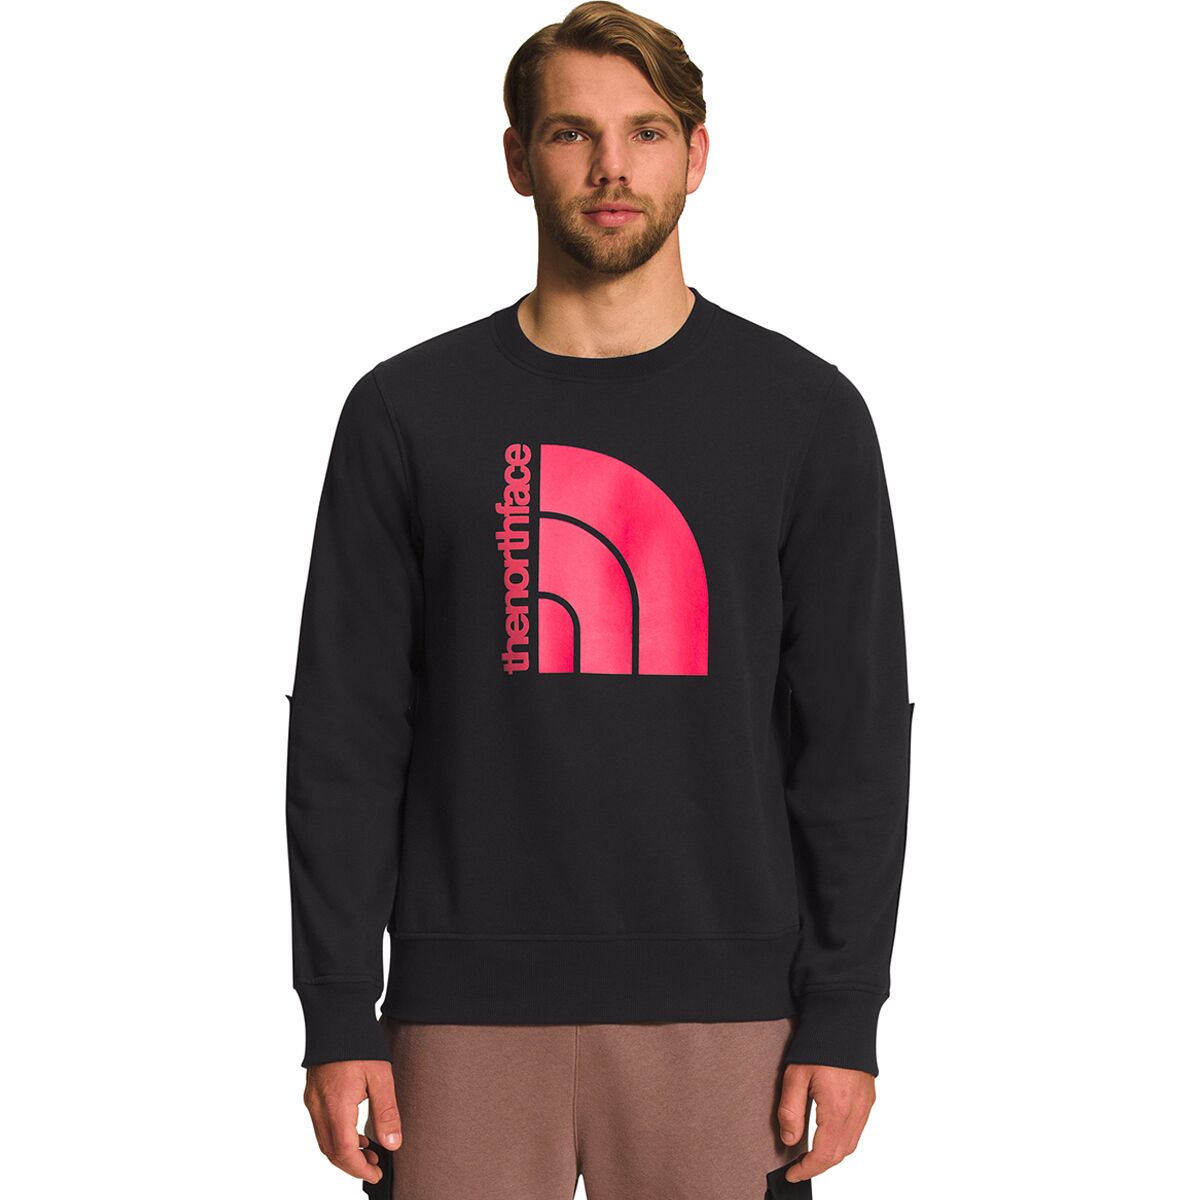 The North Face Coordinates Crew - Men's product image